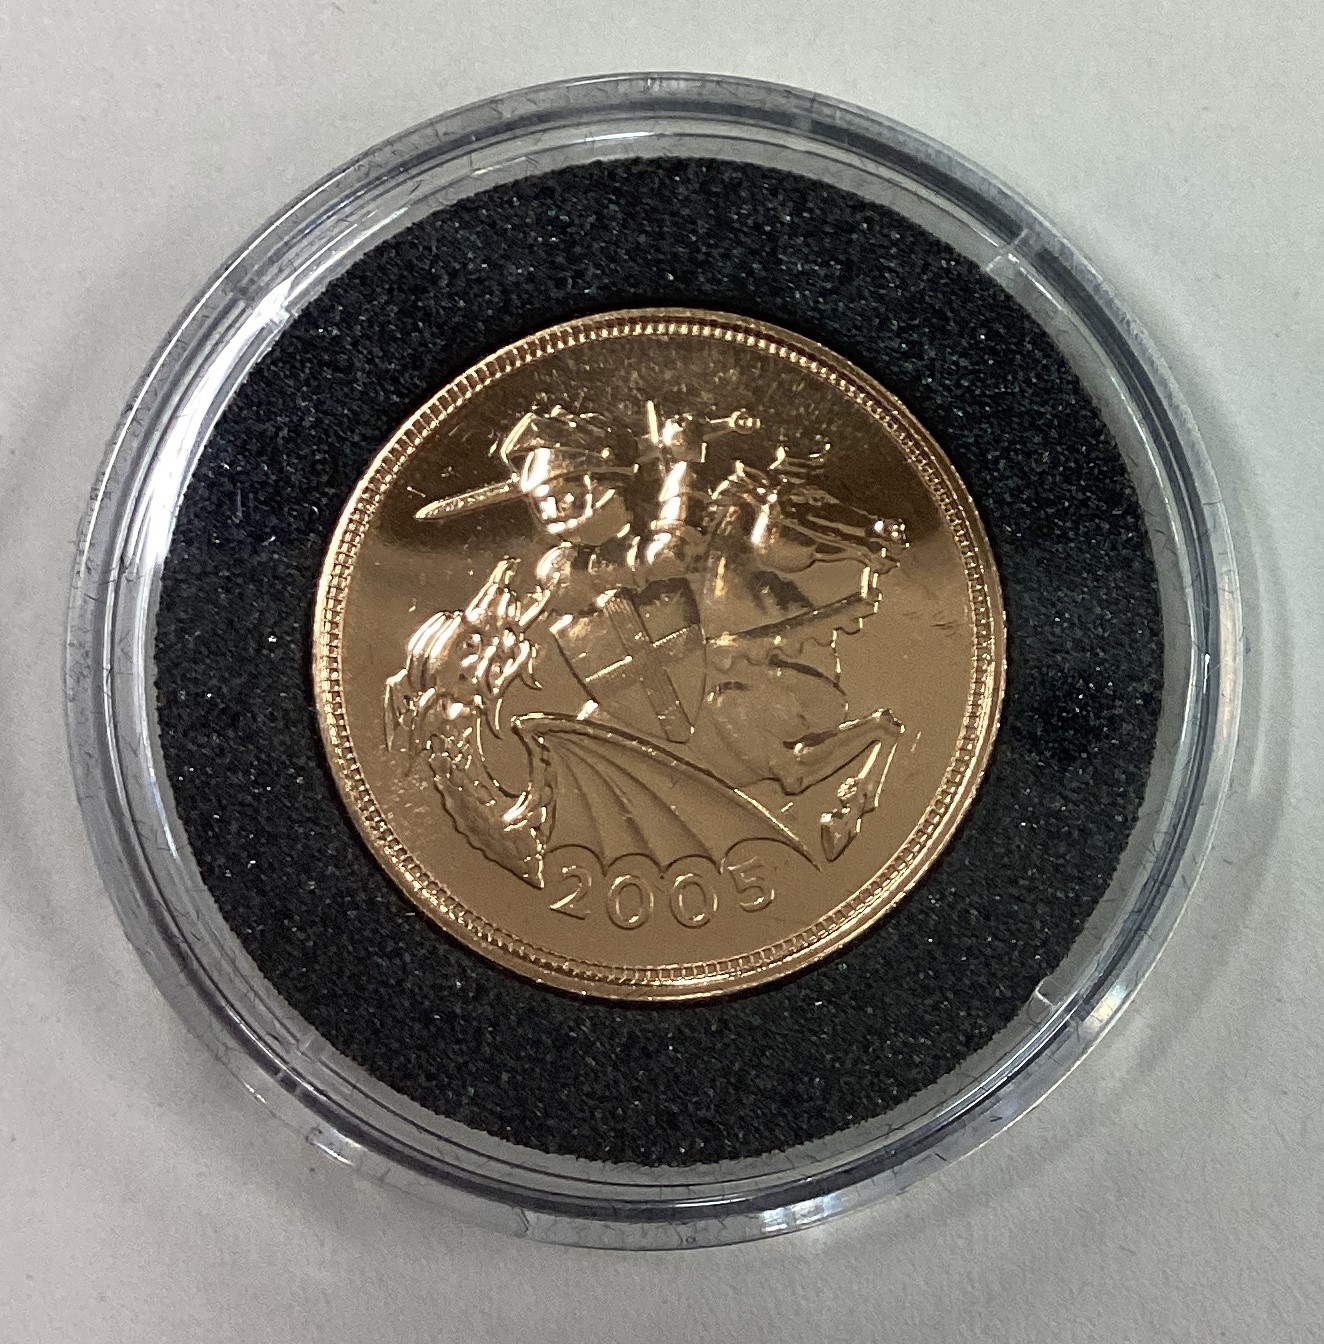 A 2005 gold Full Sovereign coin.